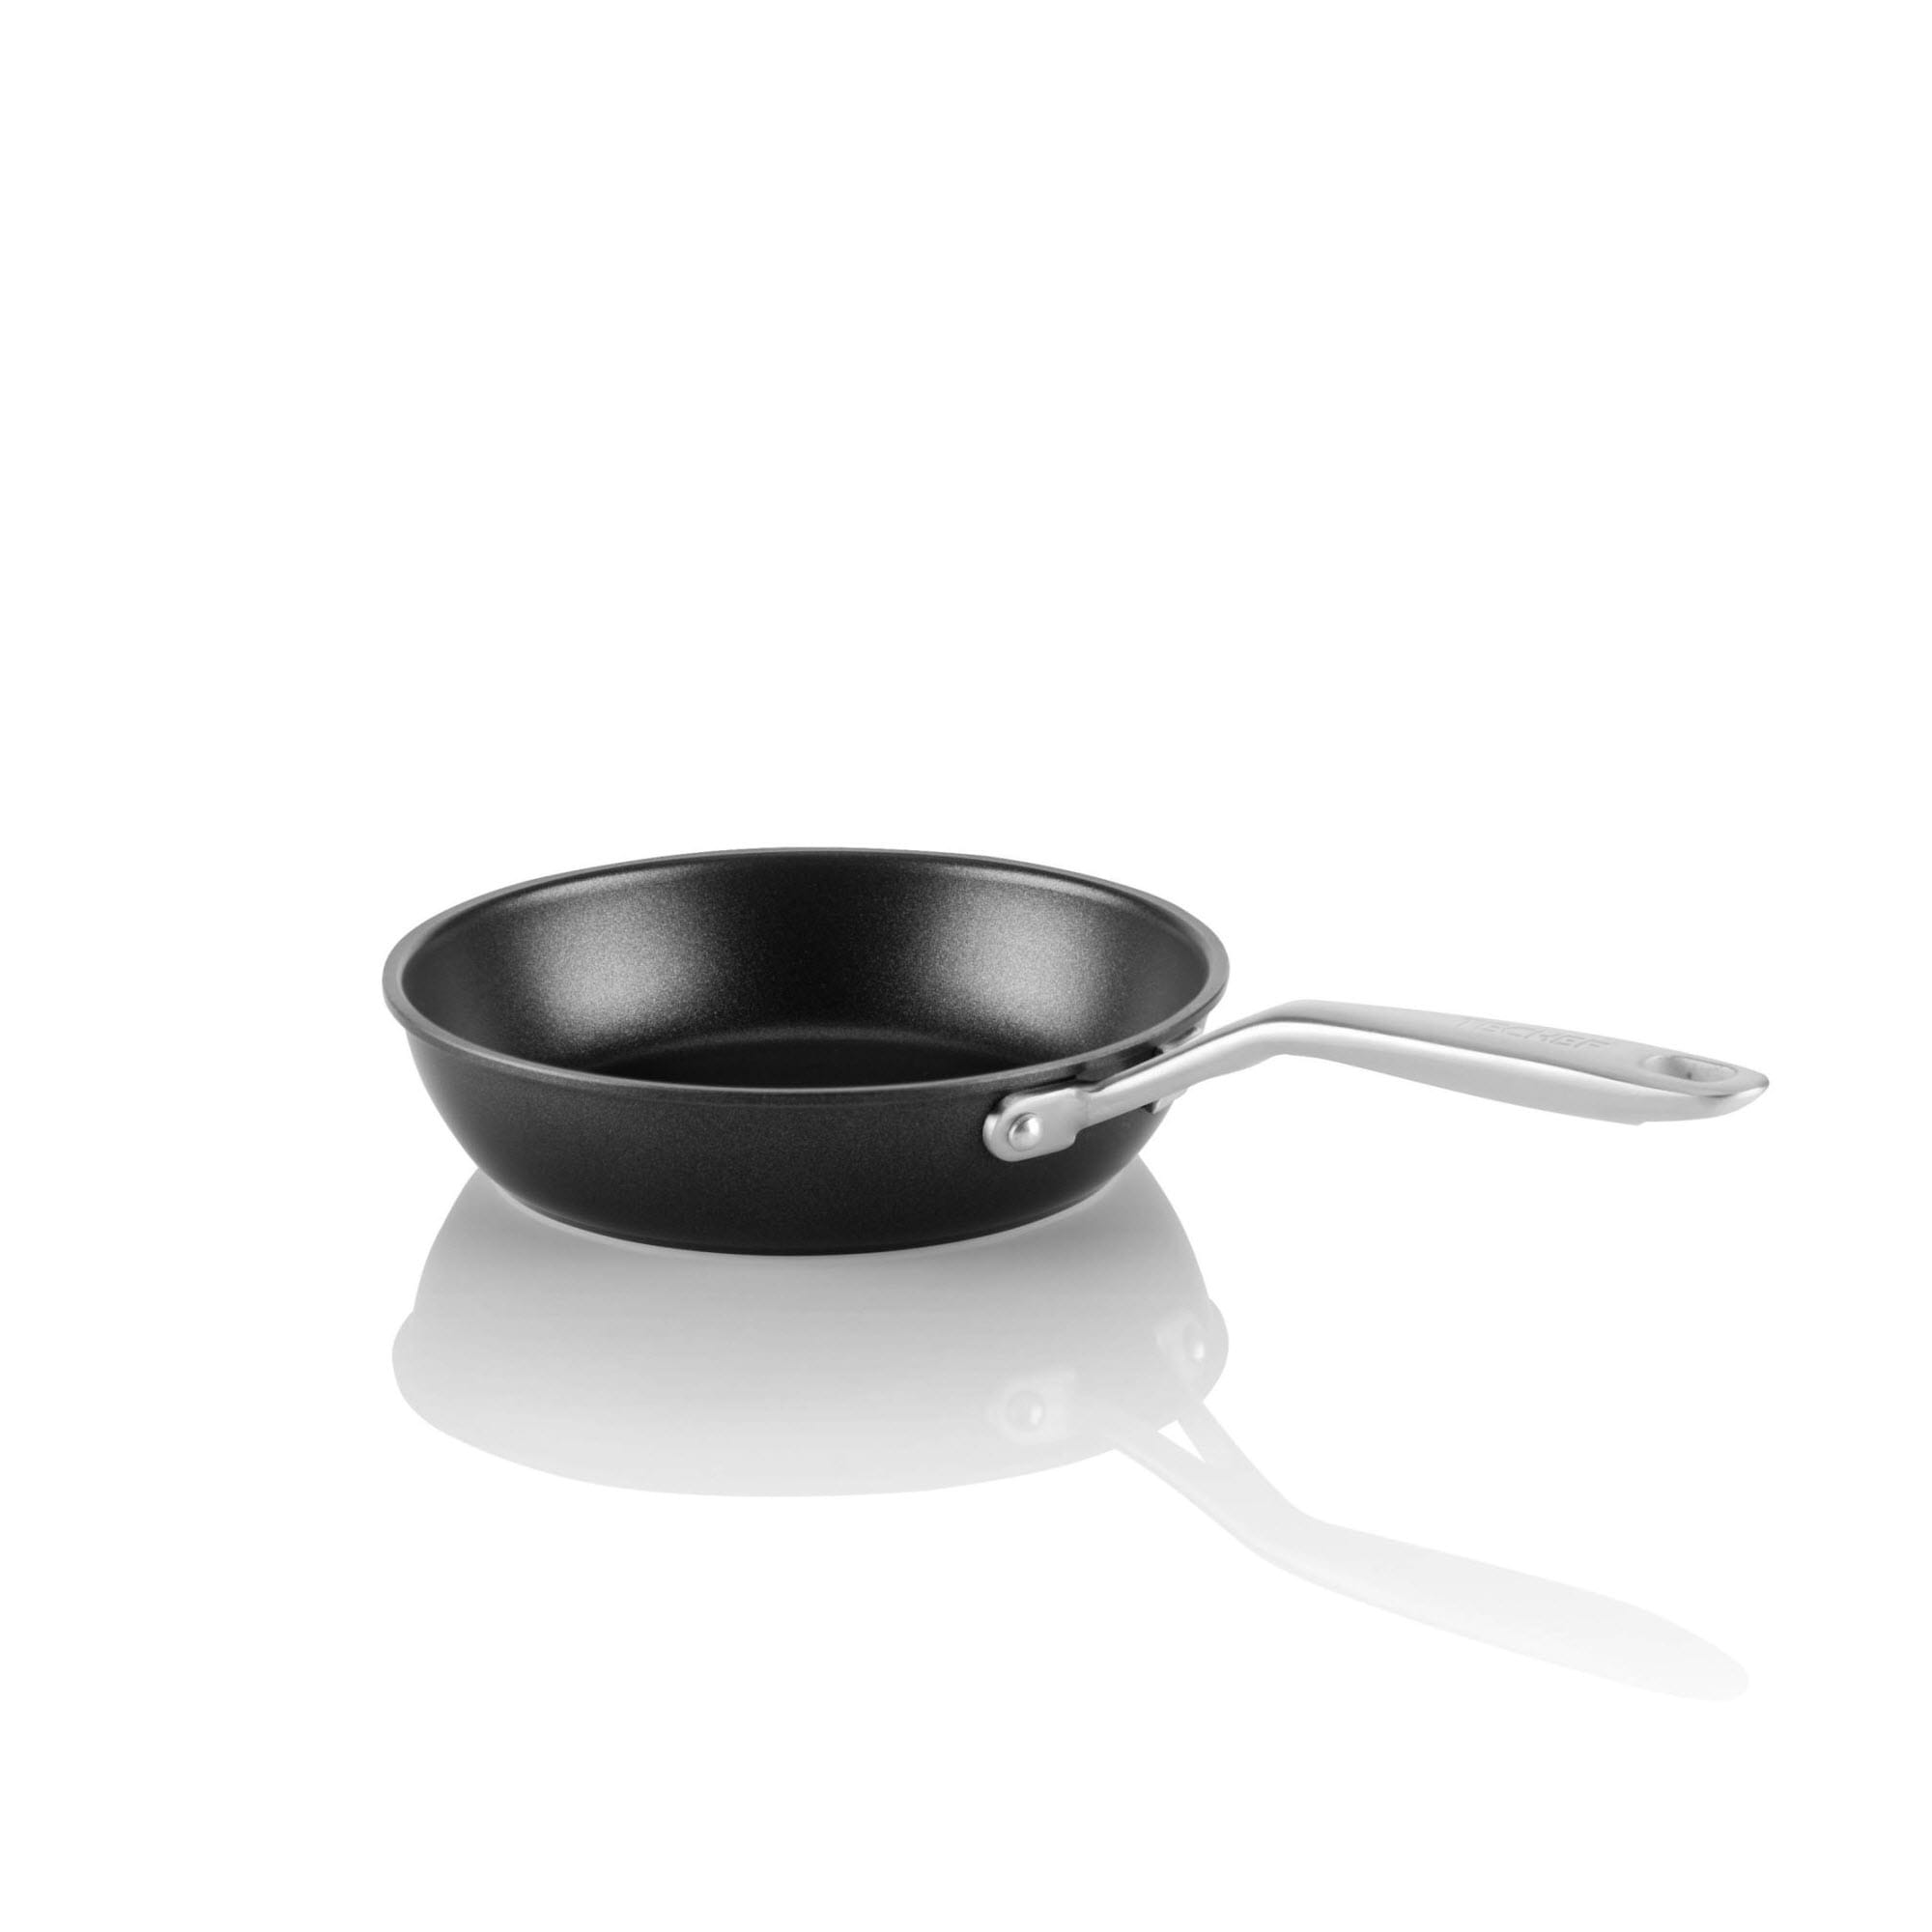 TECHEF Art Pan Collection, 8 and 12 Inch Frying Pan Set - Bed Bath